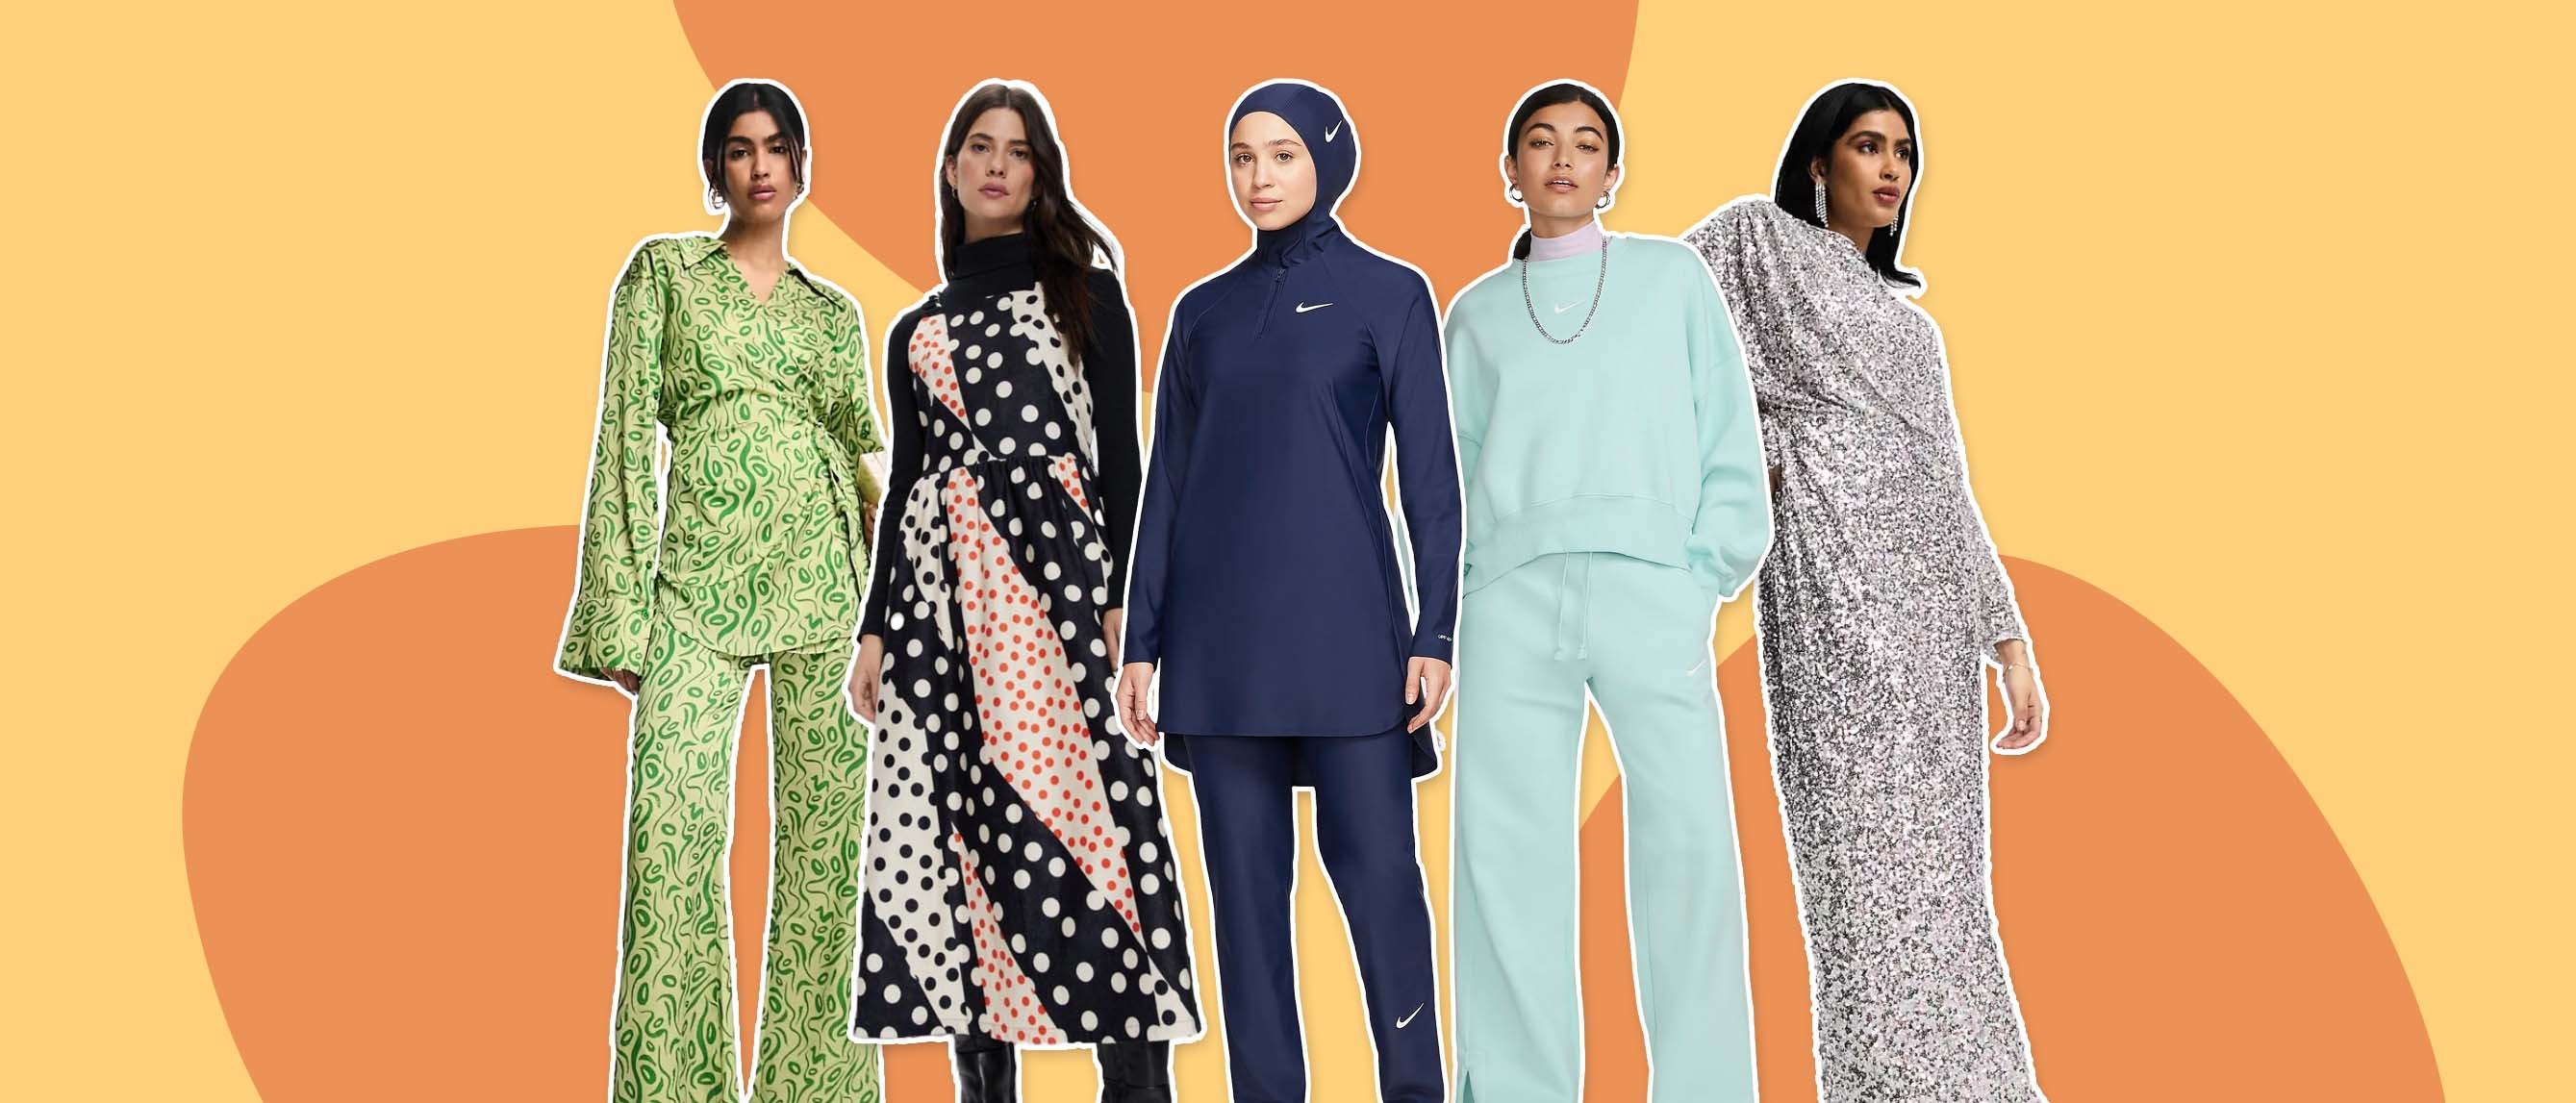 Everything you need to know about modest fashion